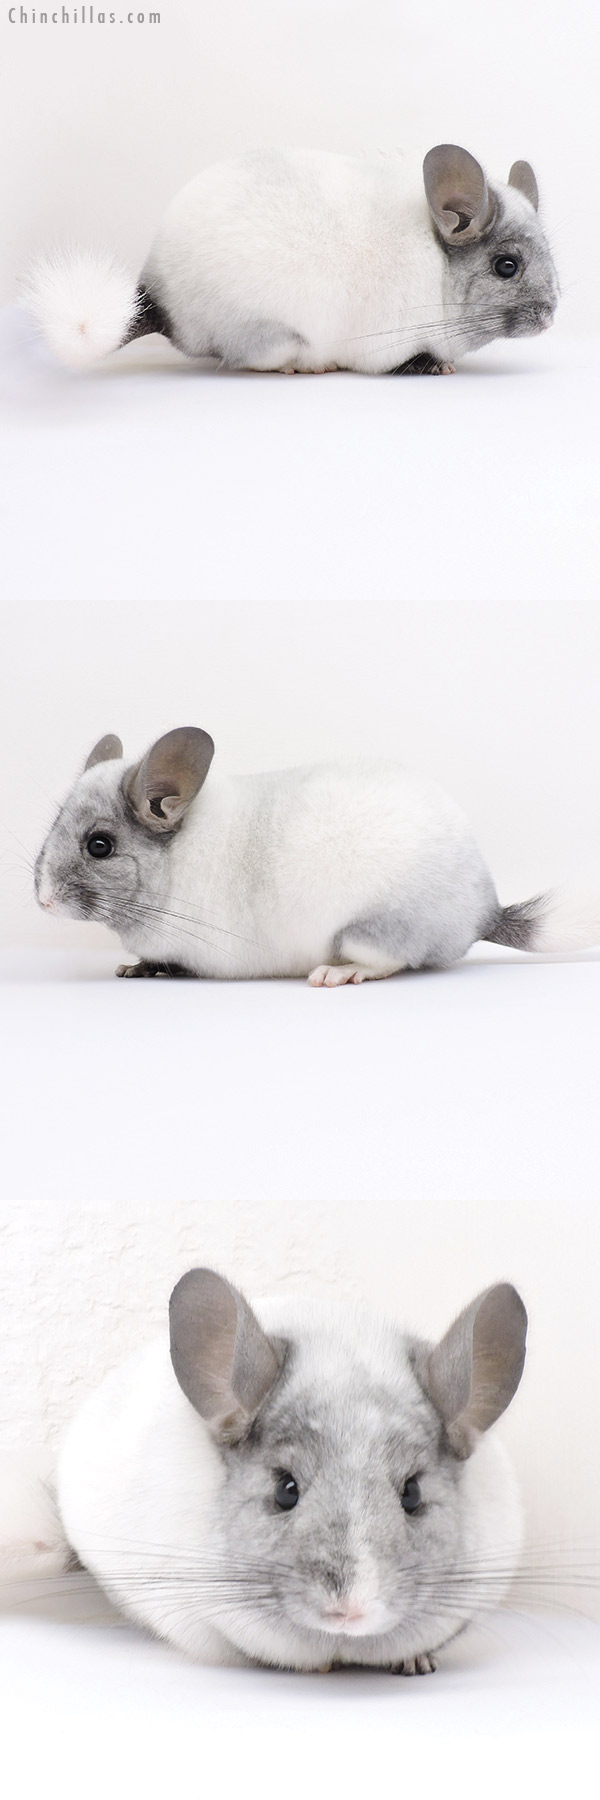 Chinchilla or related item offered for sale or export on Chinchillas.com - 16322 Show Quality Ebony & White Mosaic Female Chinchilla